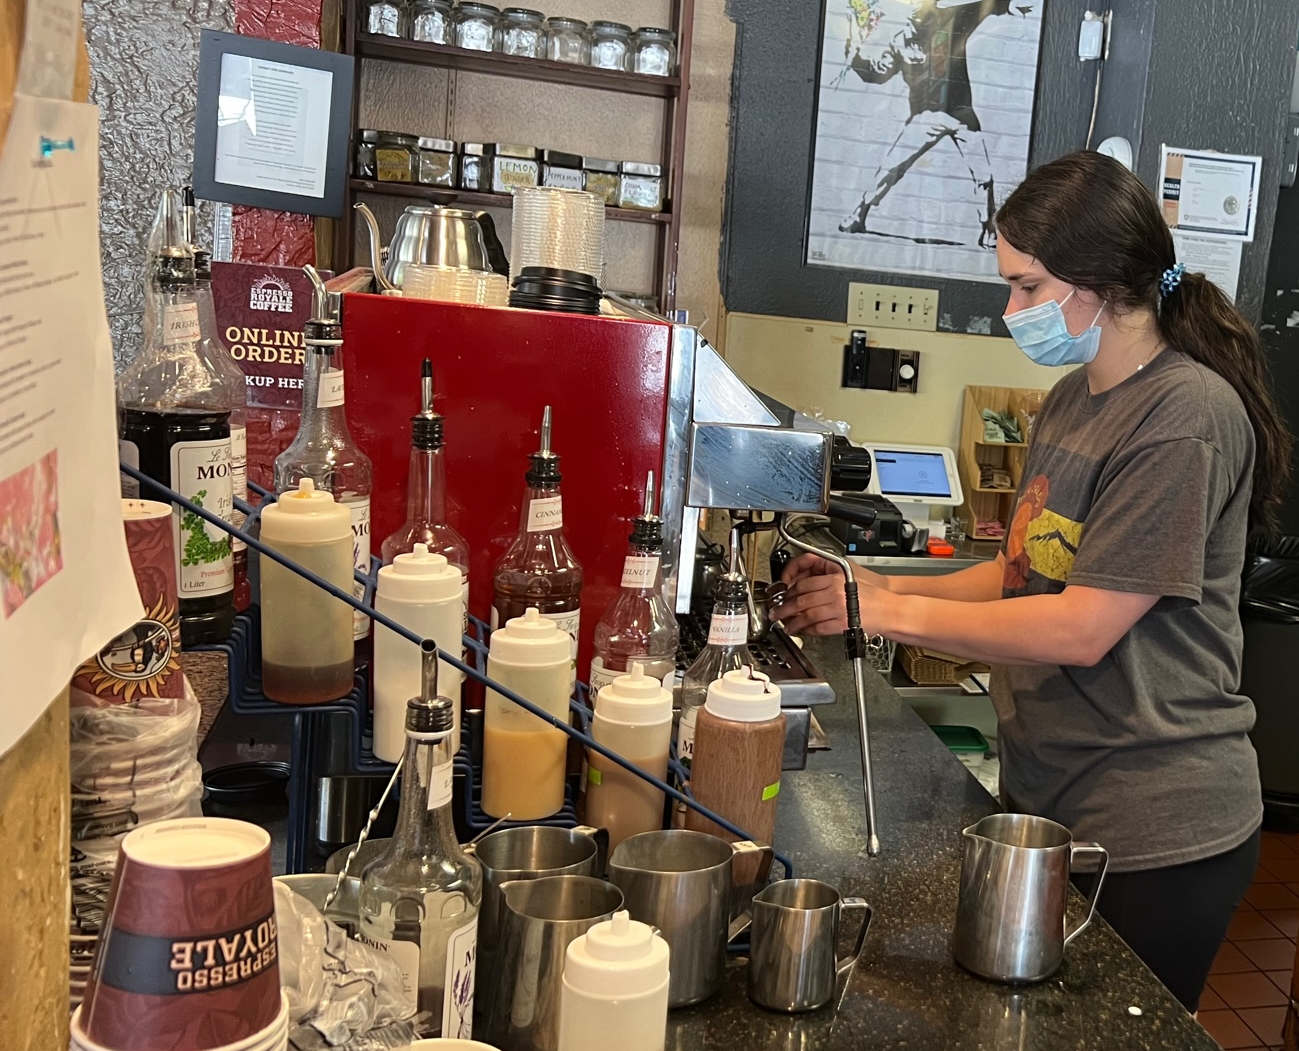 Manager Anika Nims makes a drink on the espresso machine at the Espresso Royale Krannert View location. She is masked in a blue mask and focused on the task. Photo by Alyssa Buckley.